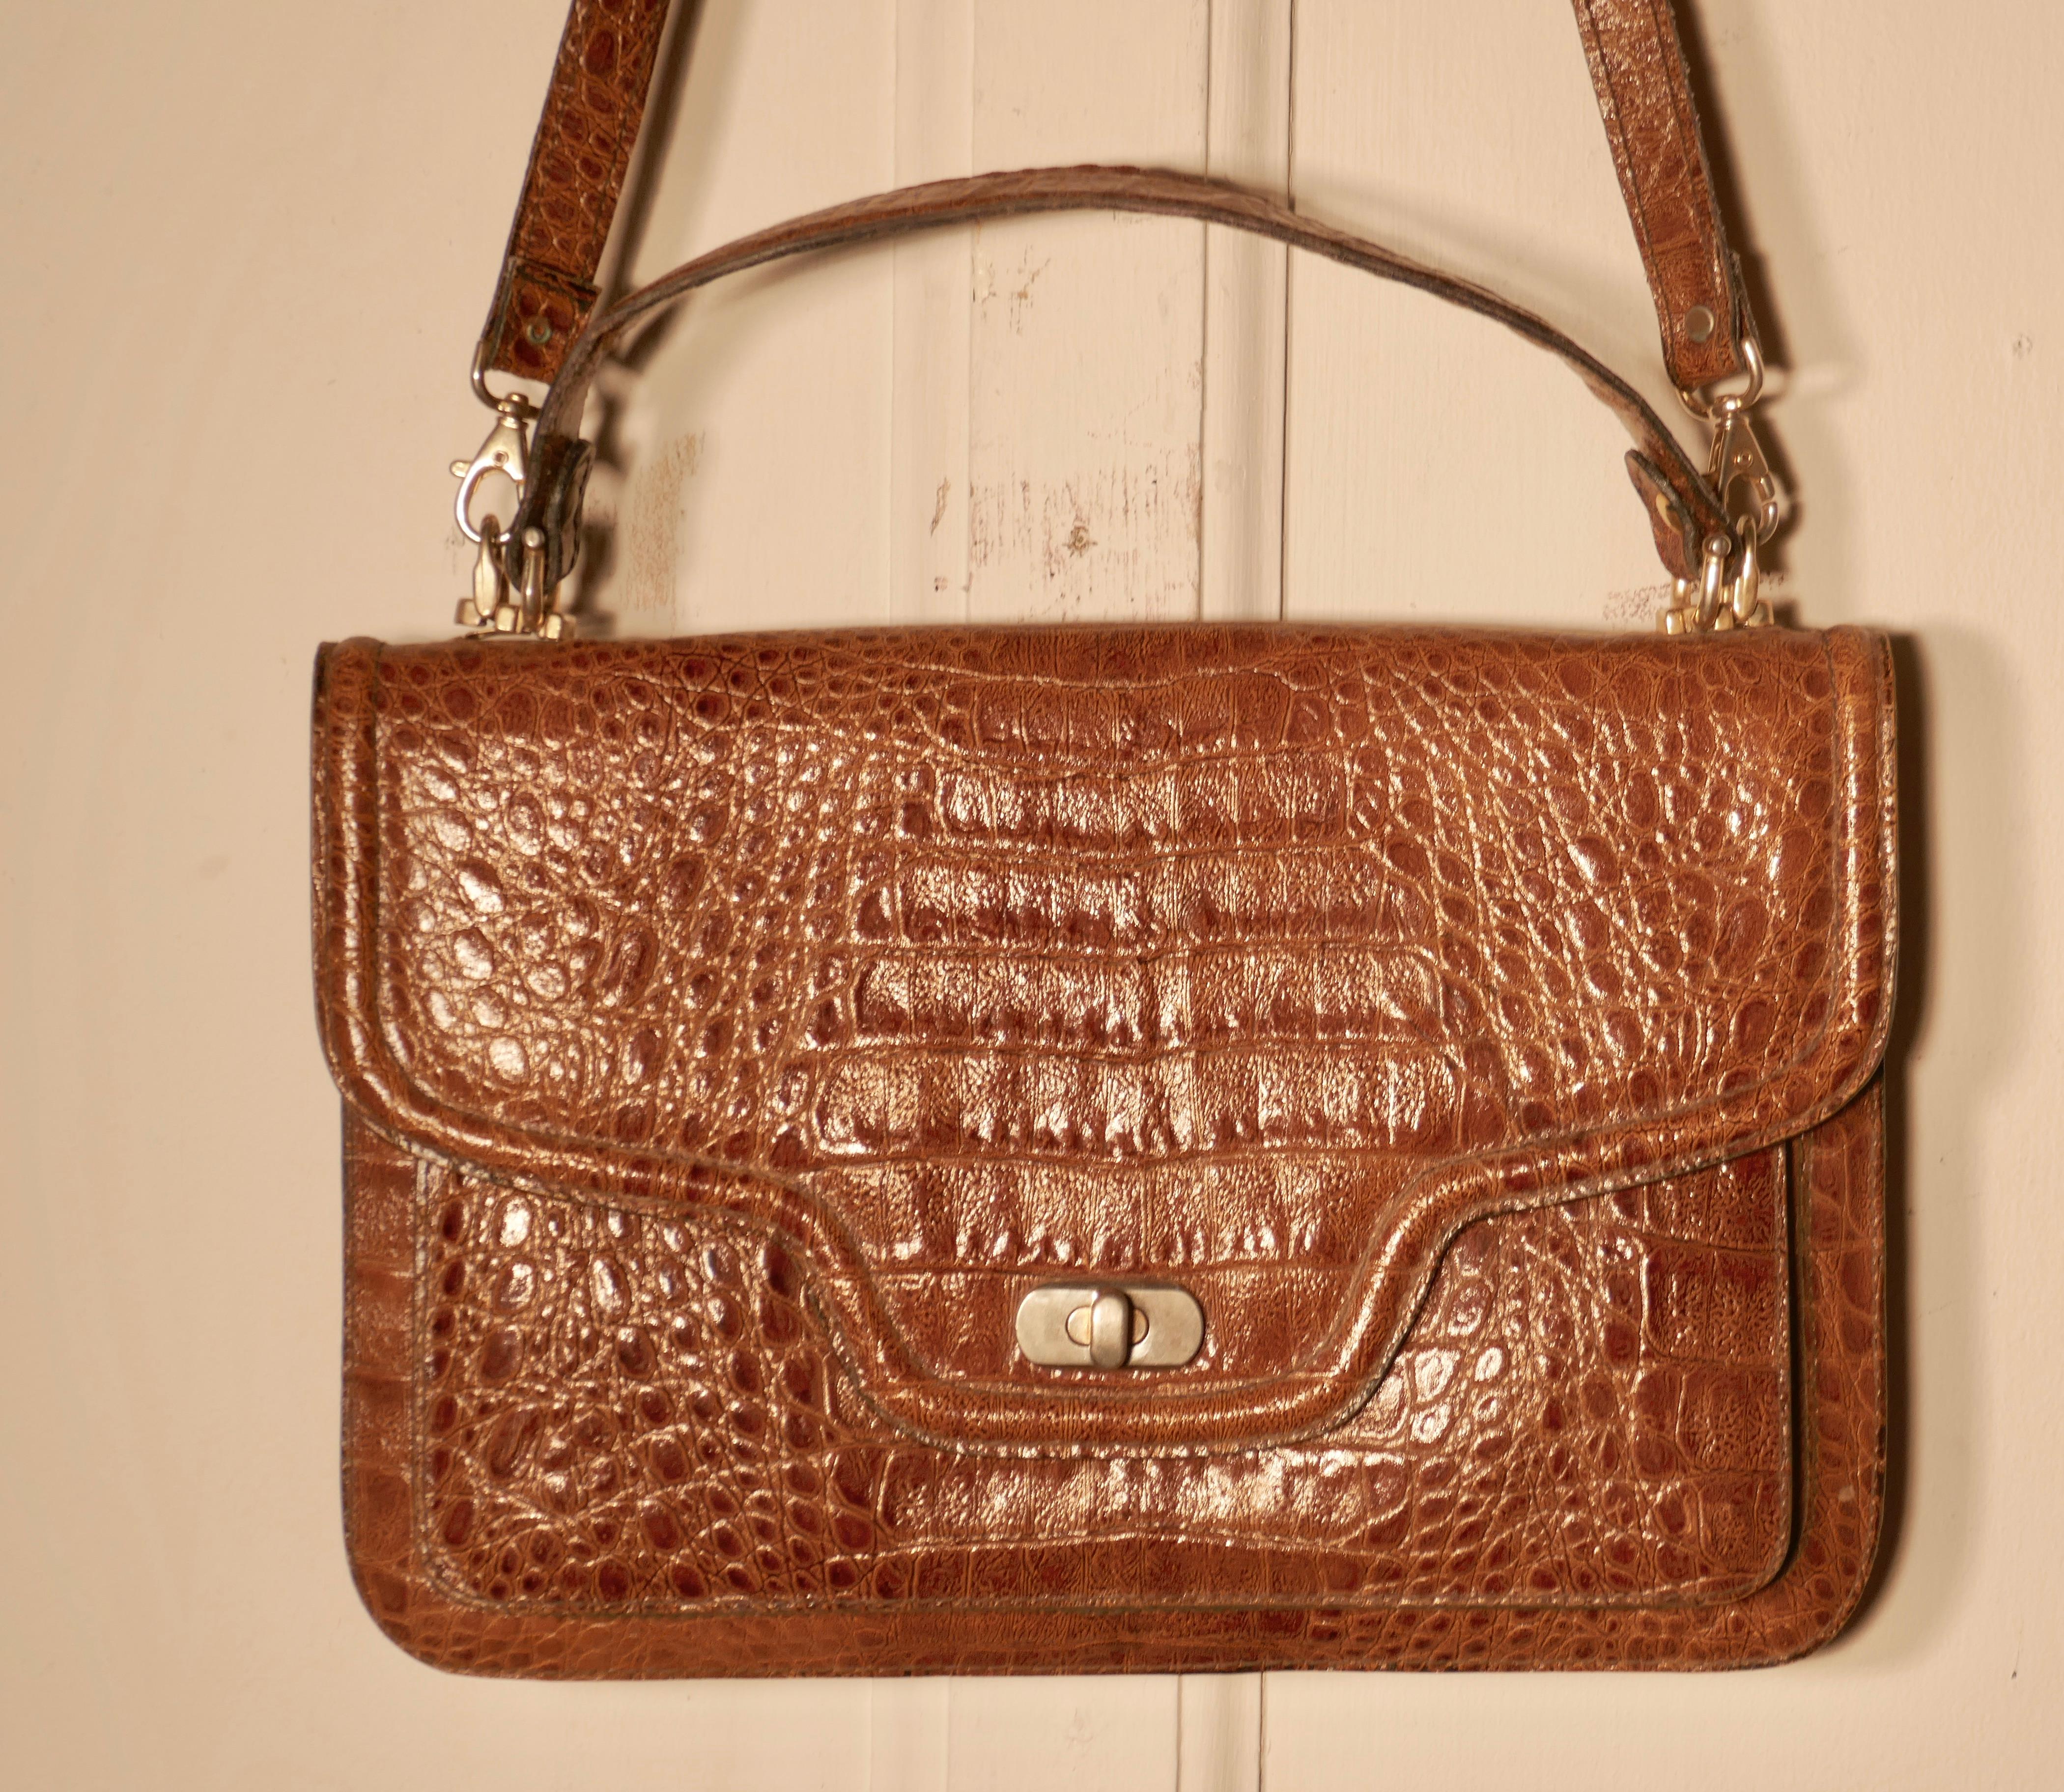 1960s Vintage Tan Crocodile Hand/Shoulder Bag

A great Vintage piece in very good clean condition, the bag has a choice of a single hand carrying handle and the addition of an over shoulder clip in handle turns it into a cross body bag
The interior